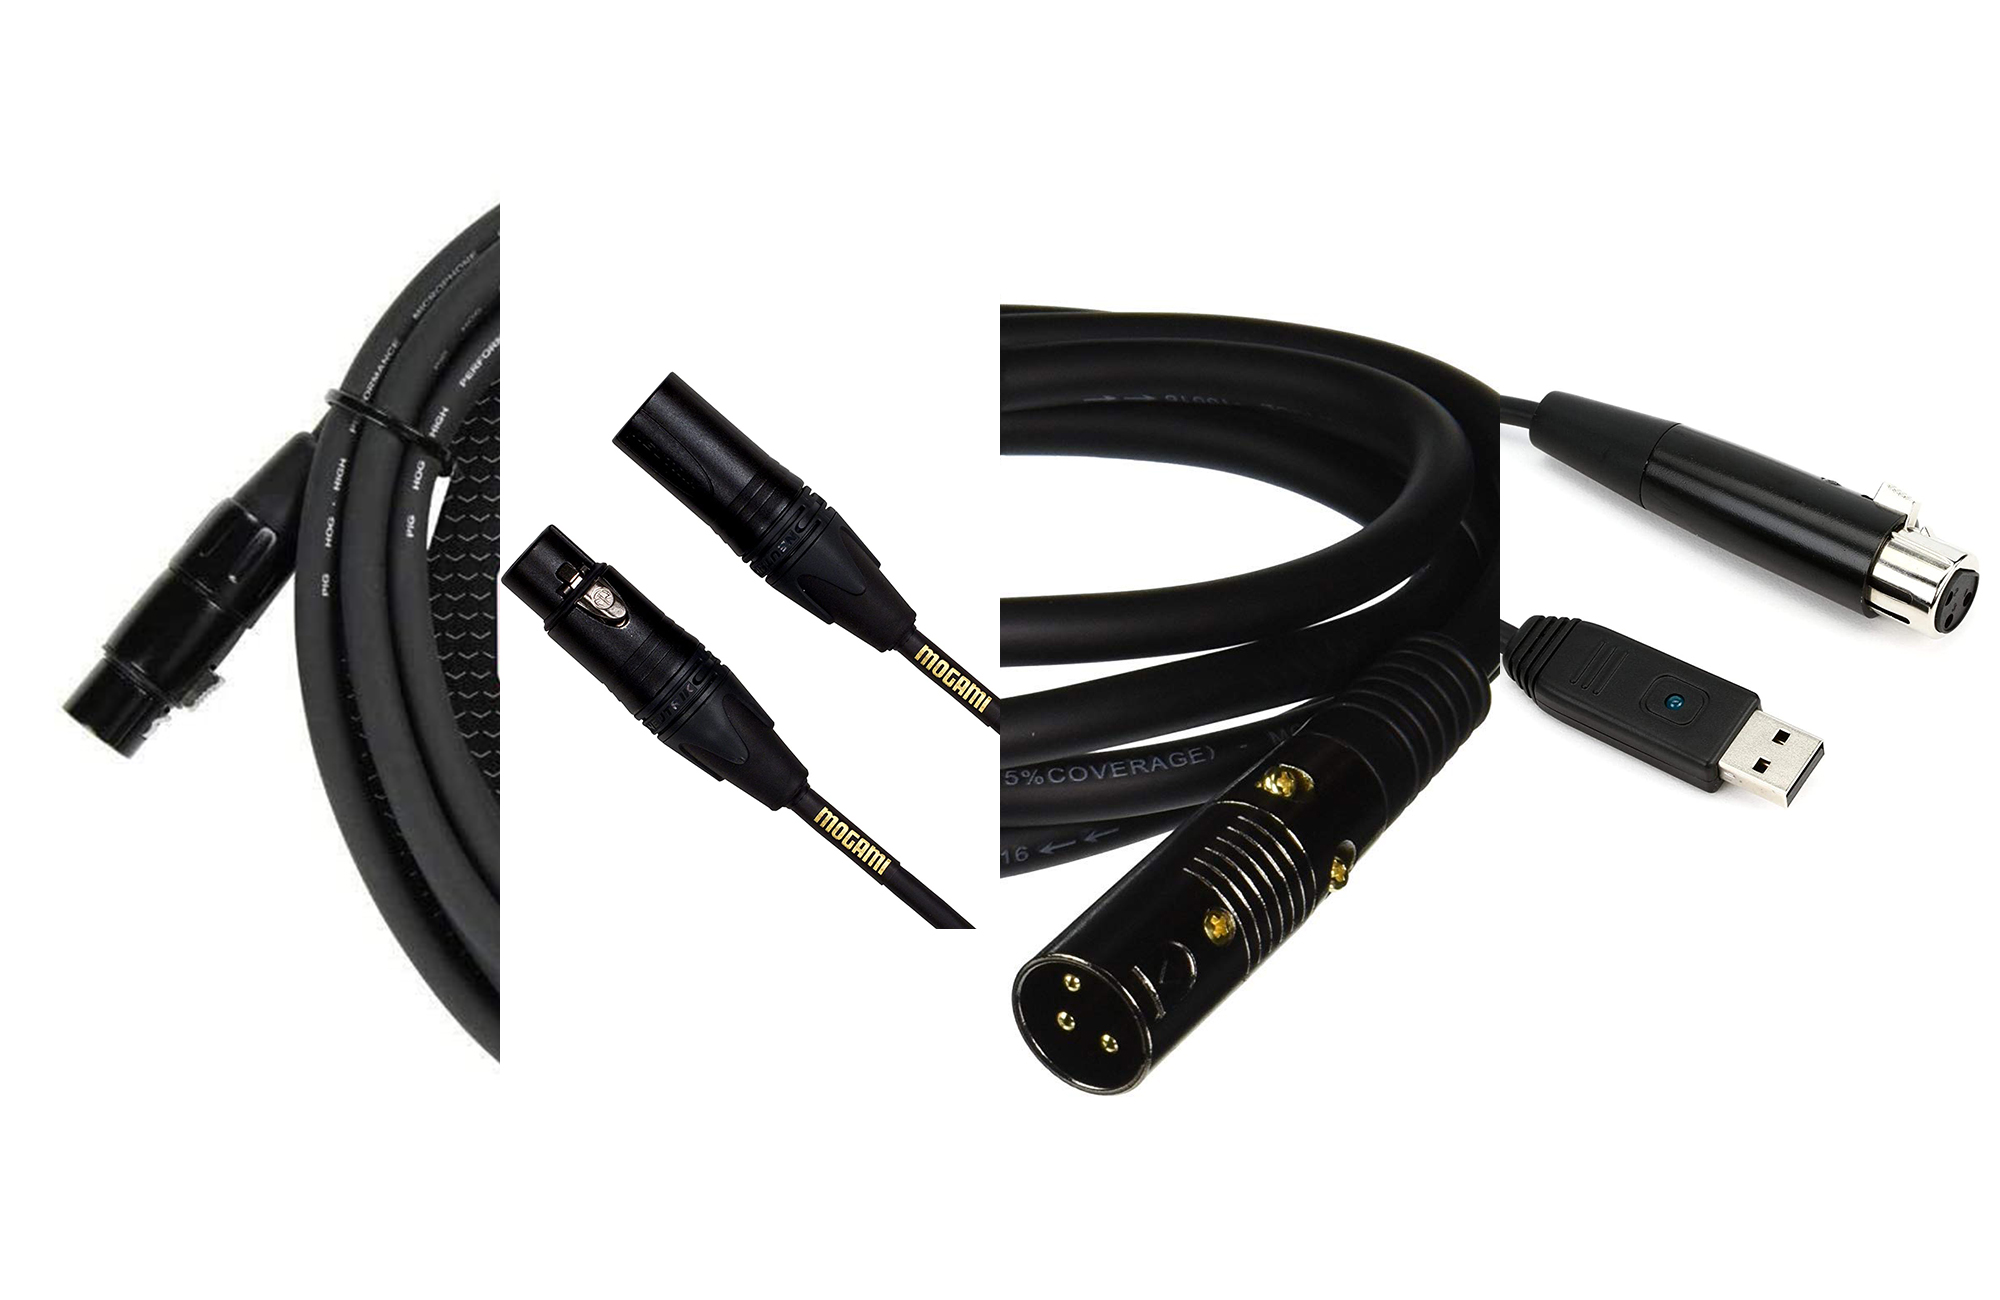 Phono Cable, Award Winning, High Resolution, Best Cable